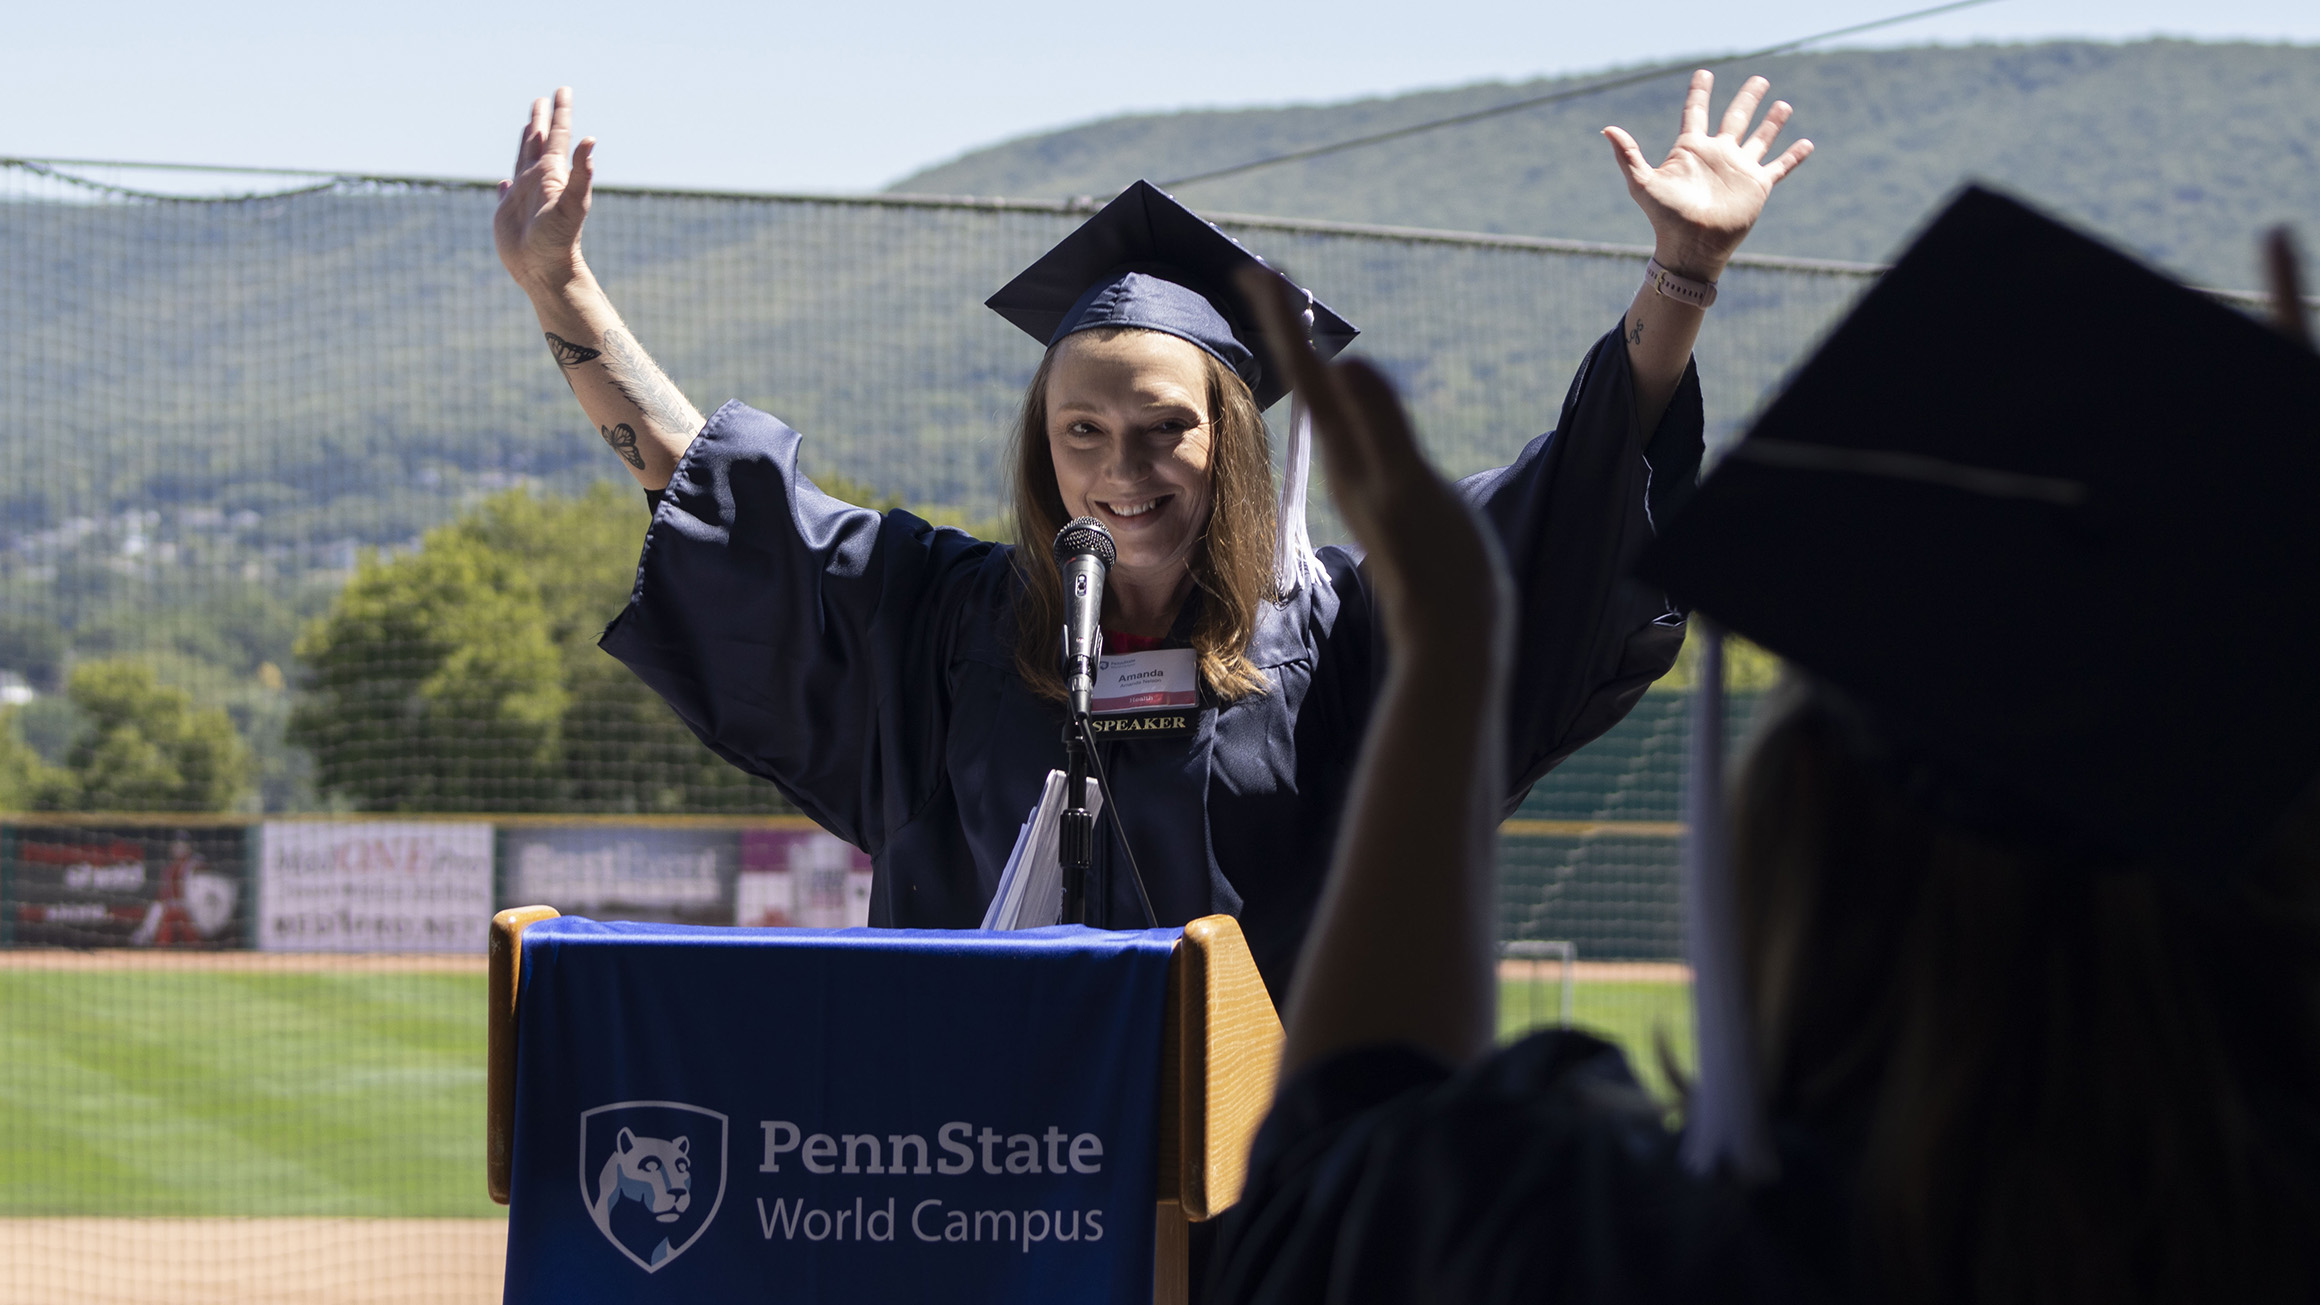 A woman wearing a blue graduation cap and gown raises her hands in celebration.